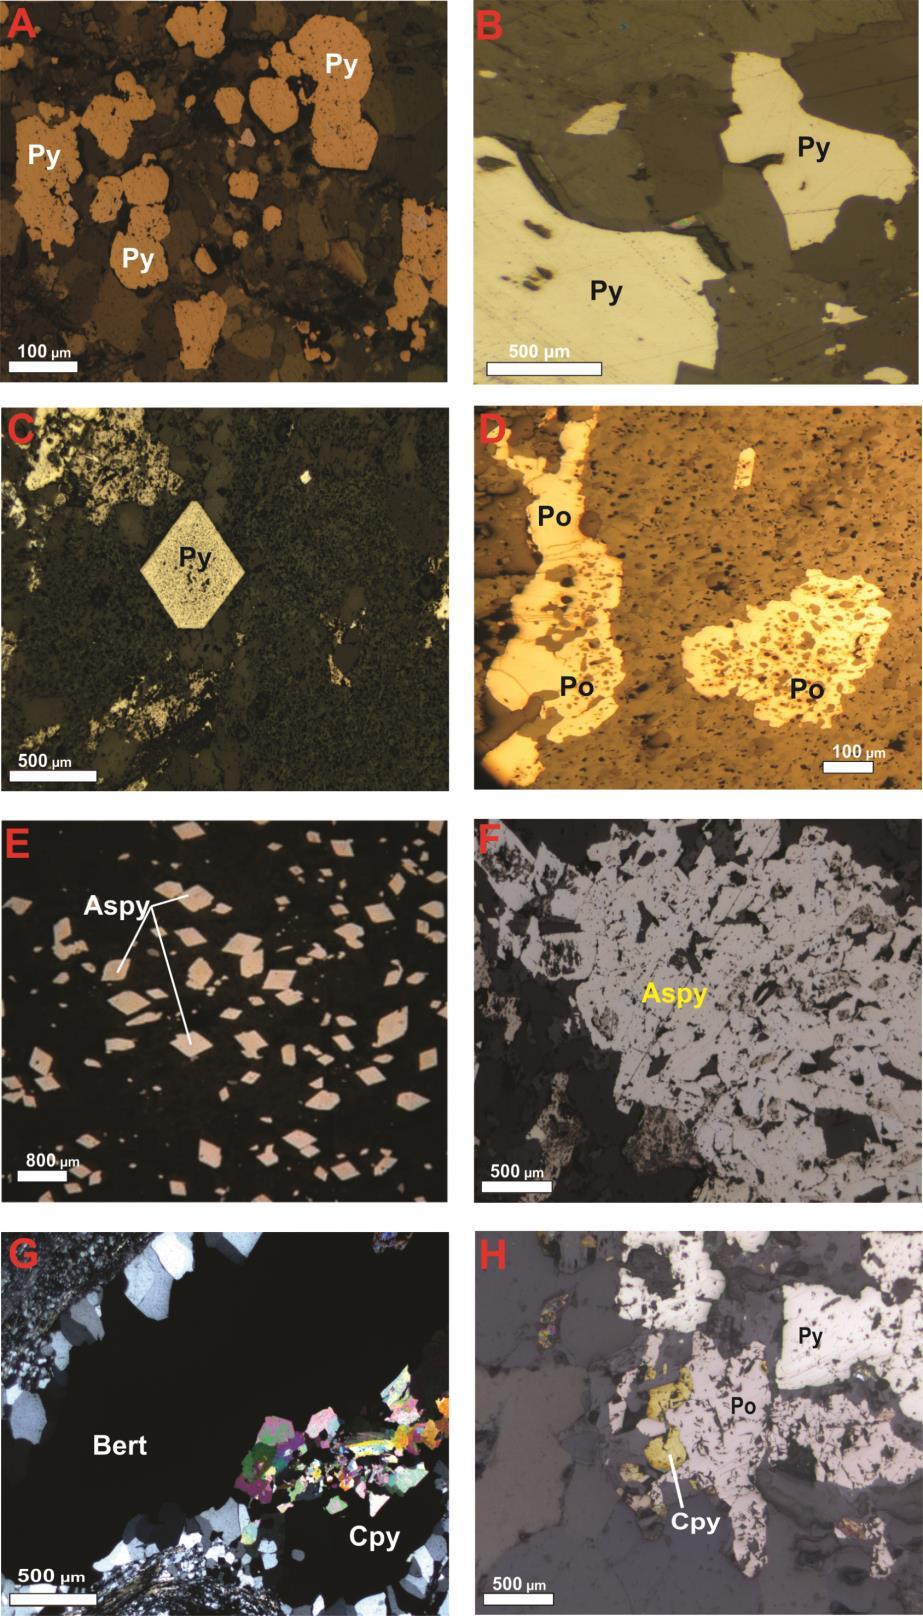 Figura 2.11 Generations of sulfide minerals associated with the Cachorro Bravo gold deposit, Córrego do Sítio auriferous lineament. (A) Primary rounded pyrite (Py) reflected light.